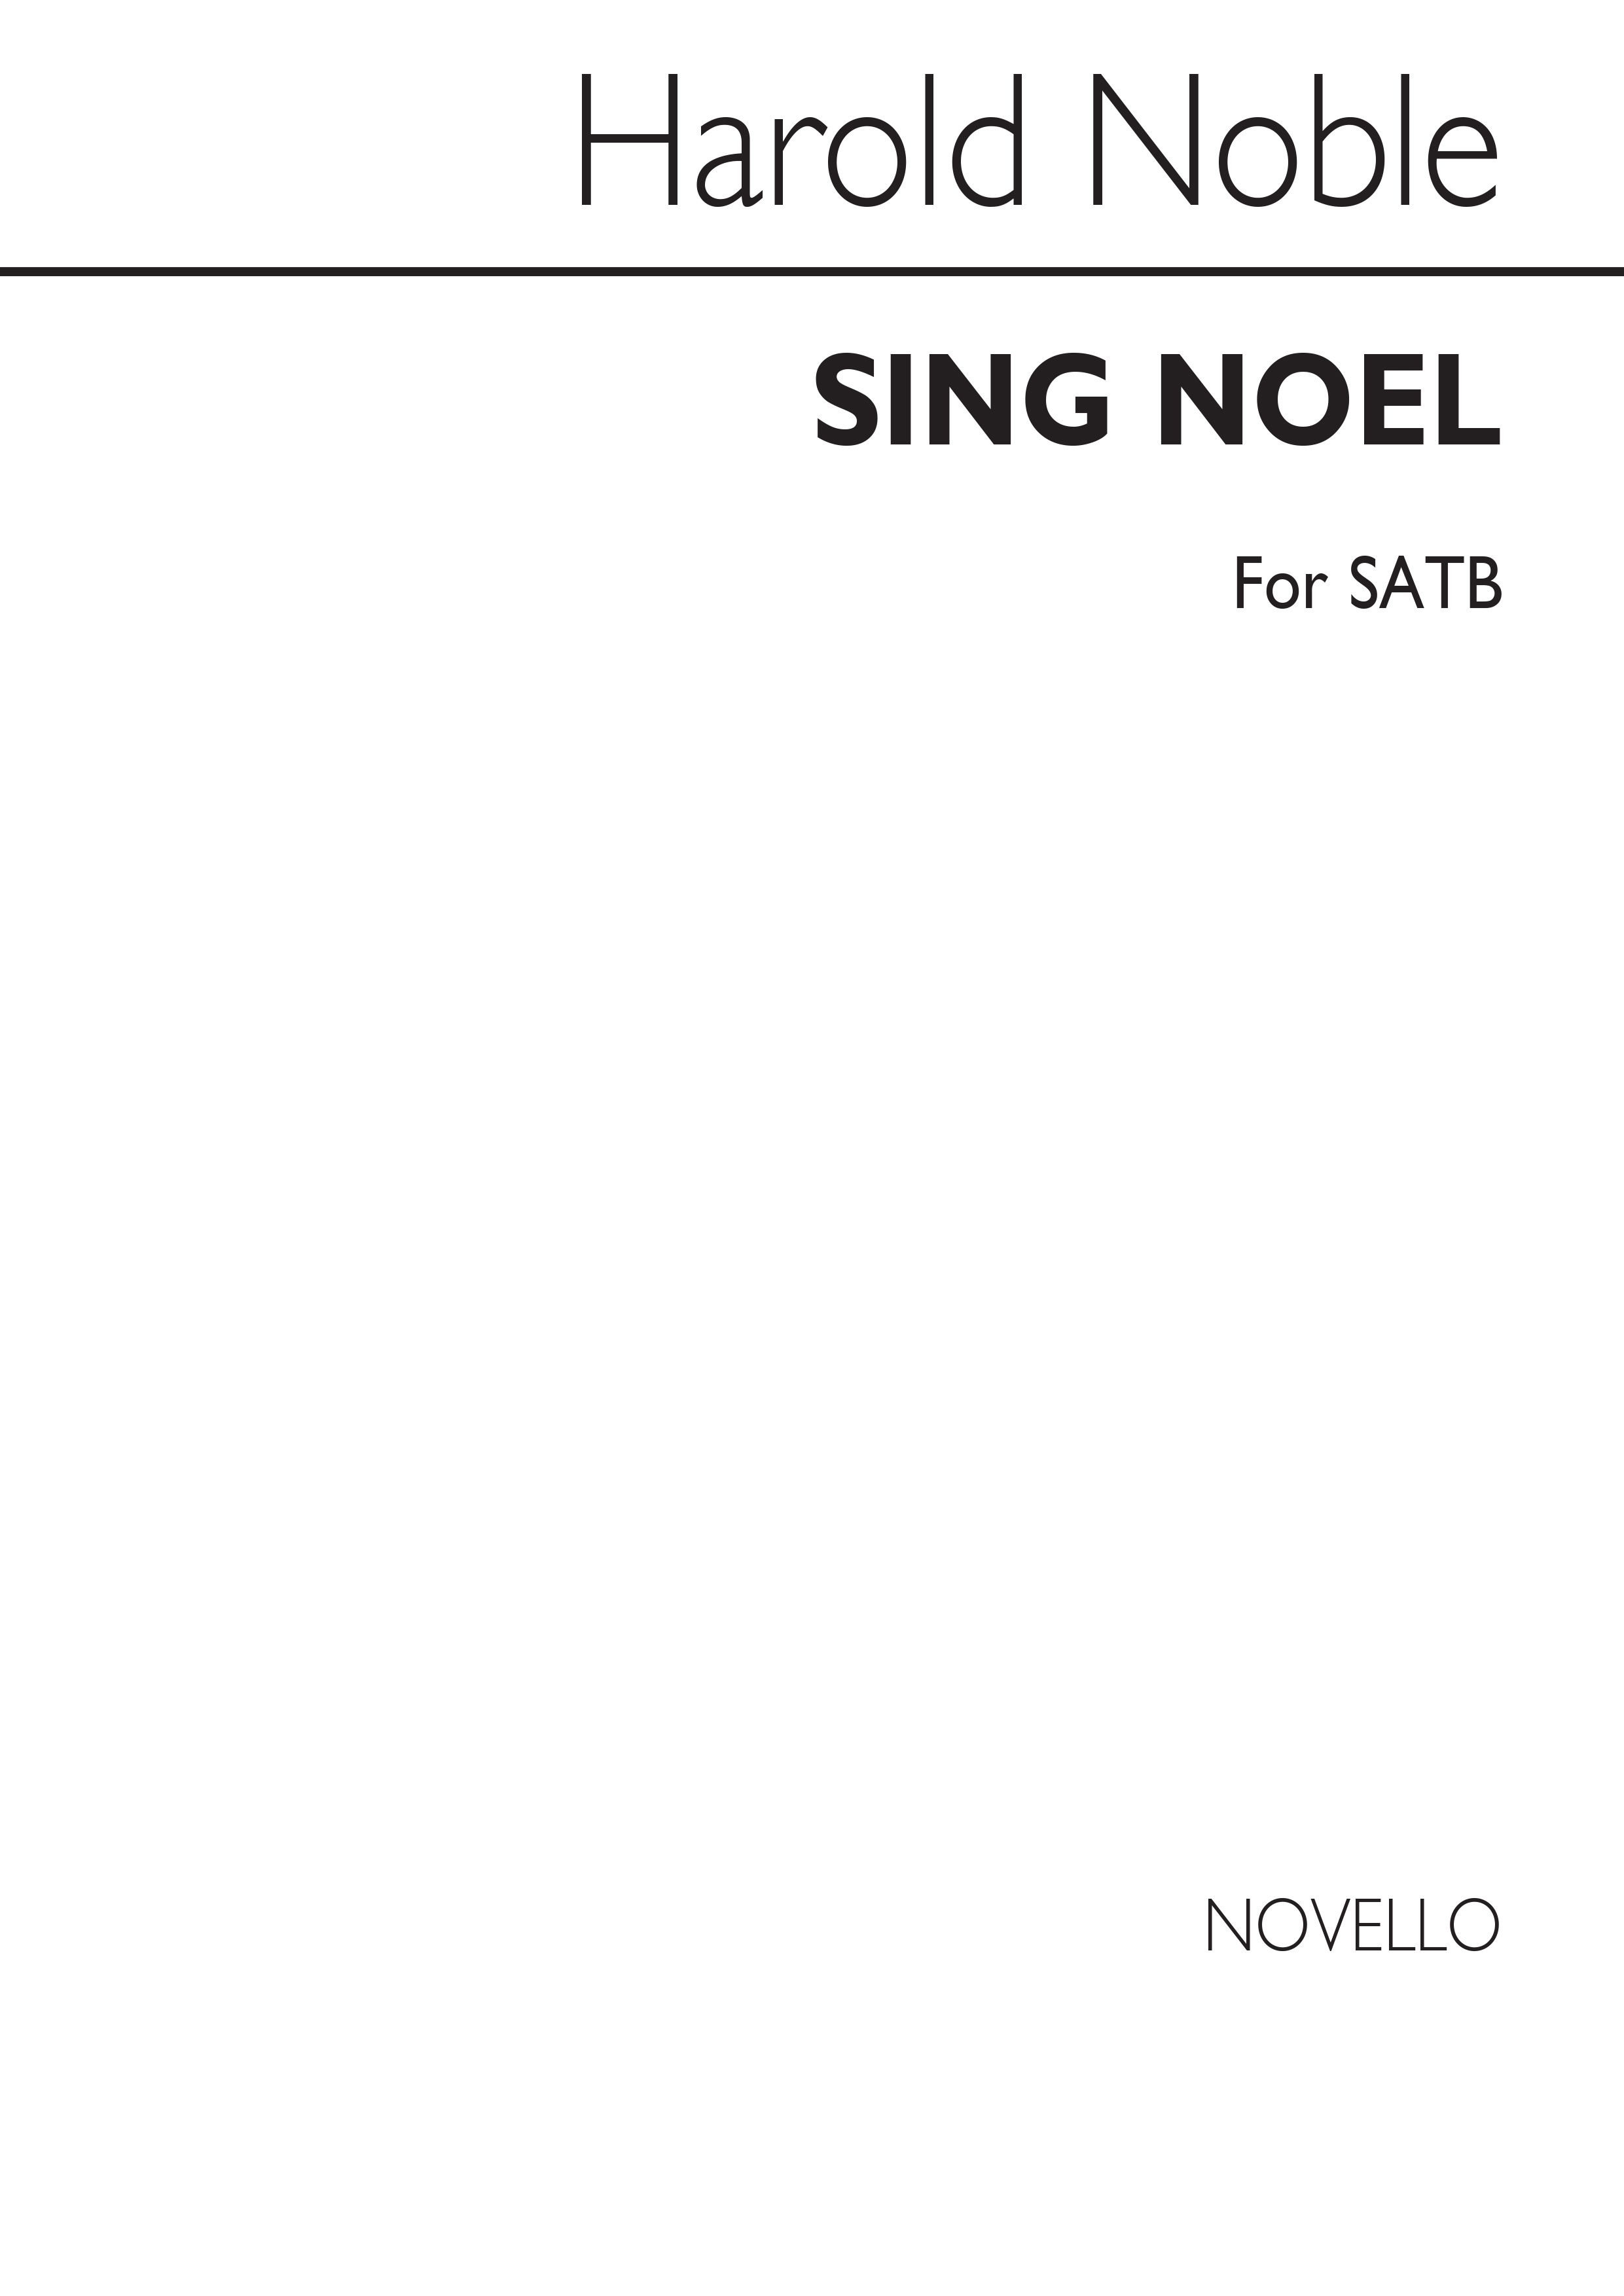 Noble: Sing Noel for SATB Chorus with Organ or Piano acc.